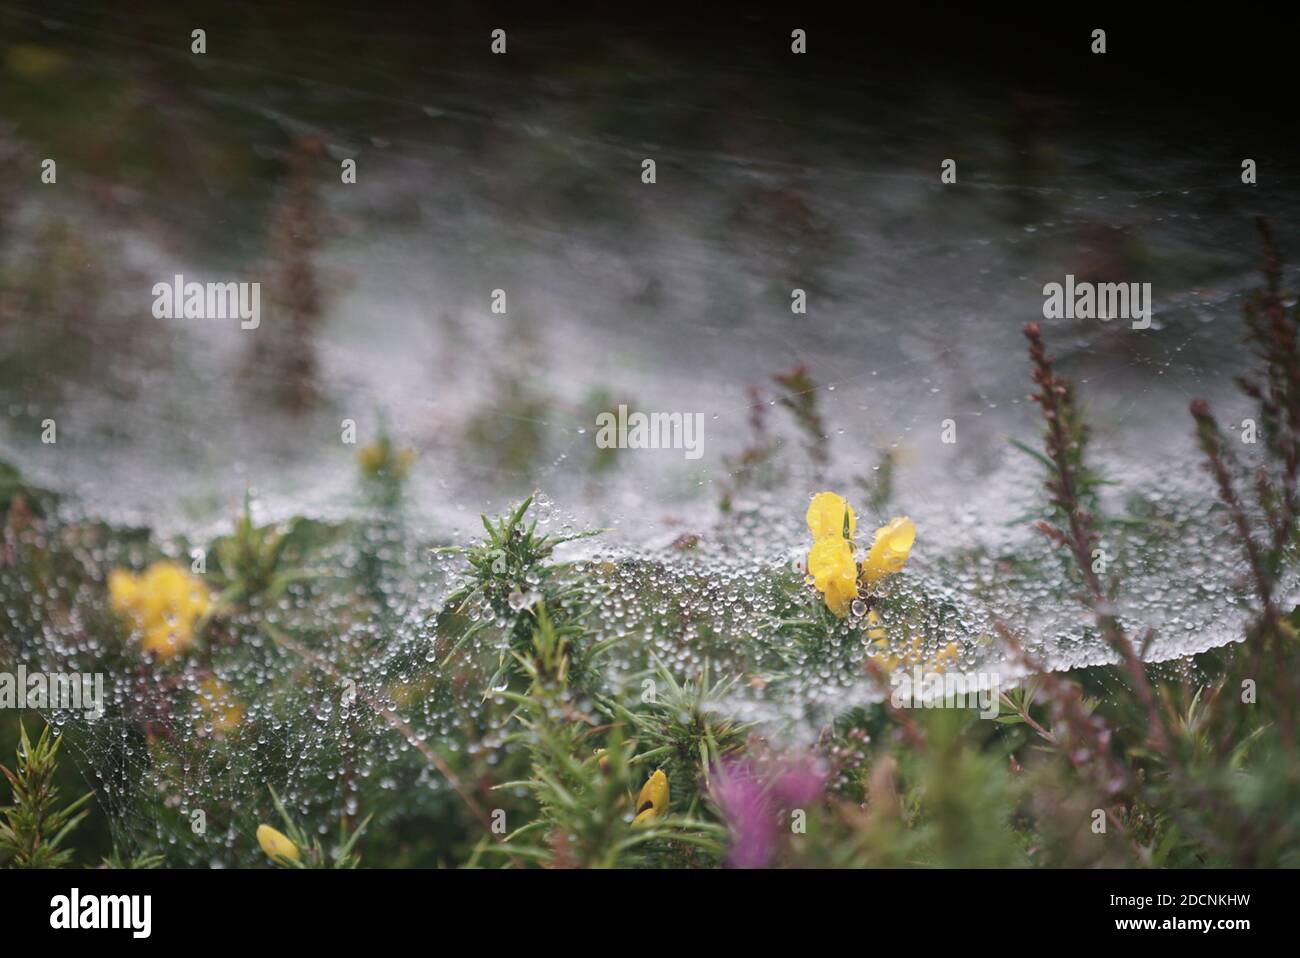 Funnel-shaped Agelena labyrinthica spider web covered in water droplets on low laying grass and vegetation at dawn in Pembrokeshire UK Stock Photo